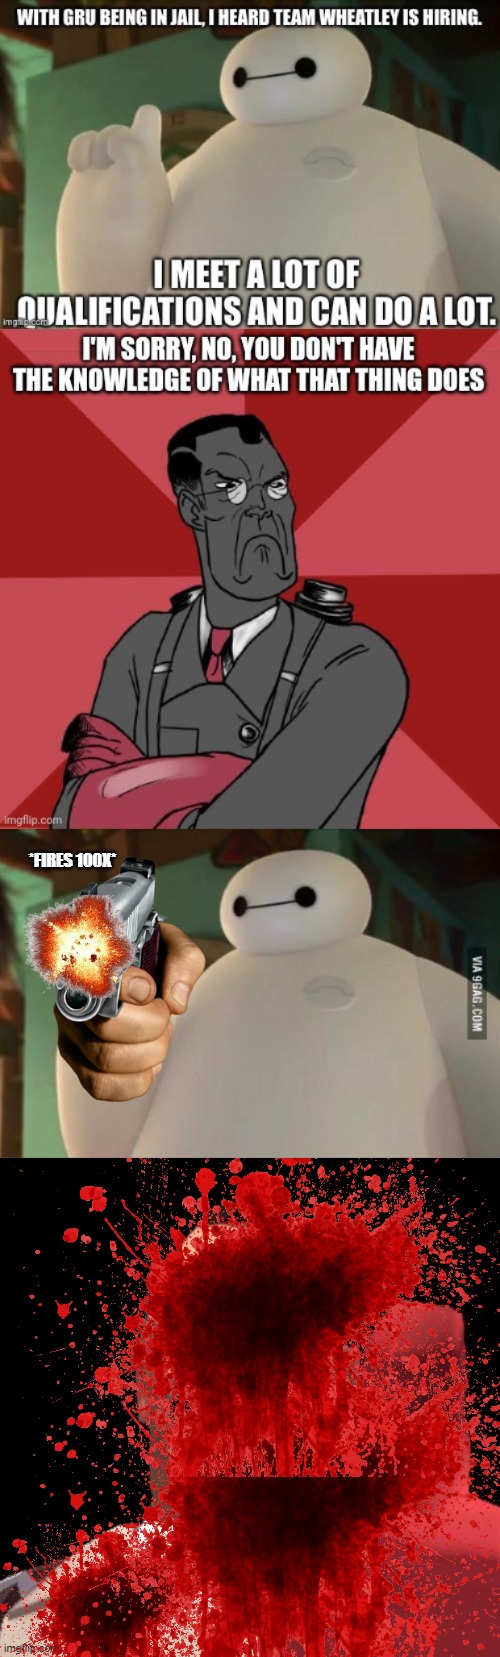 If you can somehow realive the medic, consequences will be incurred. | *FIRES 100X* | image tagged in honest baymax,tf2 medic | made w/ Imgflip meme maker